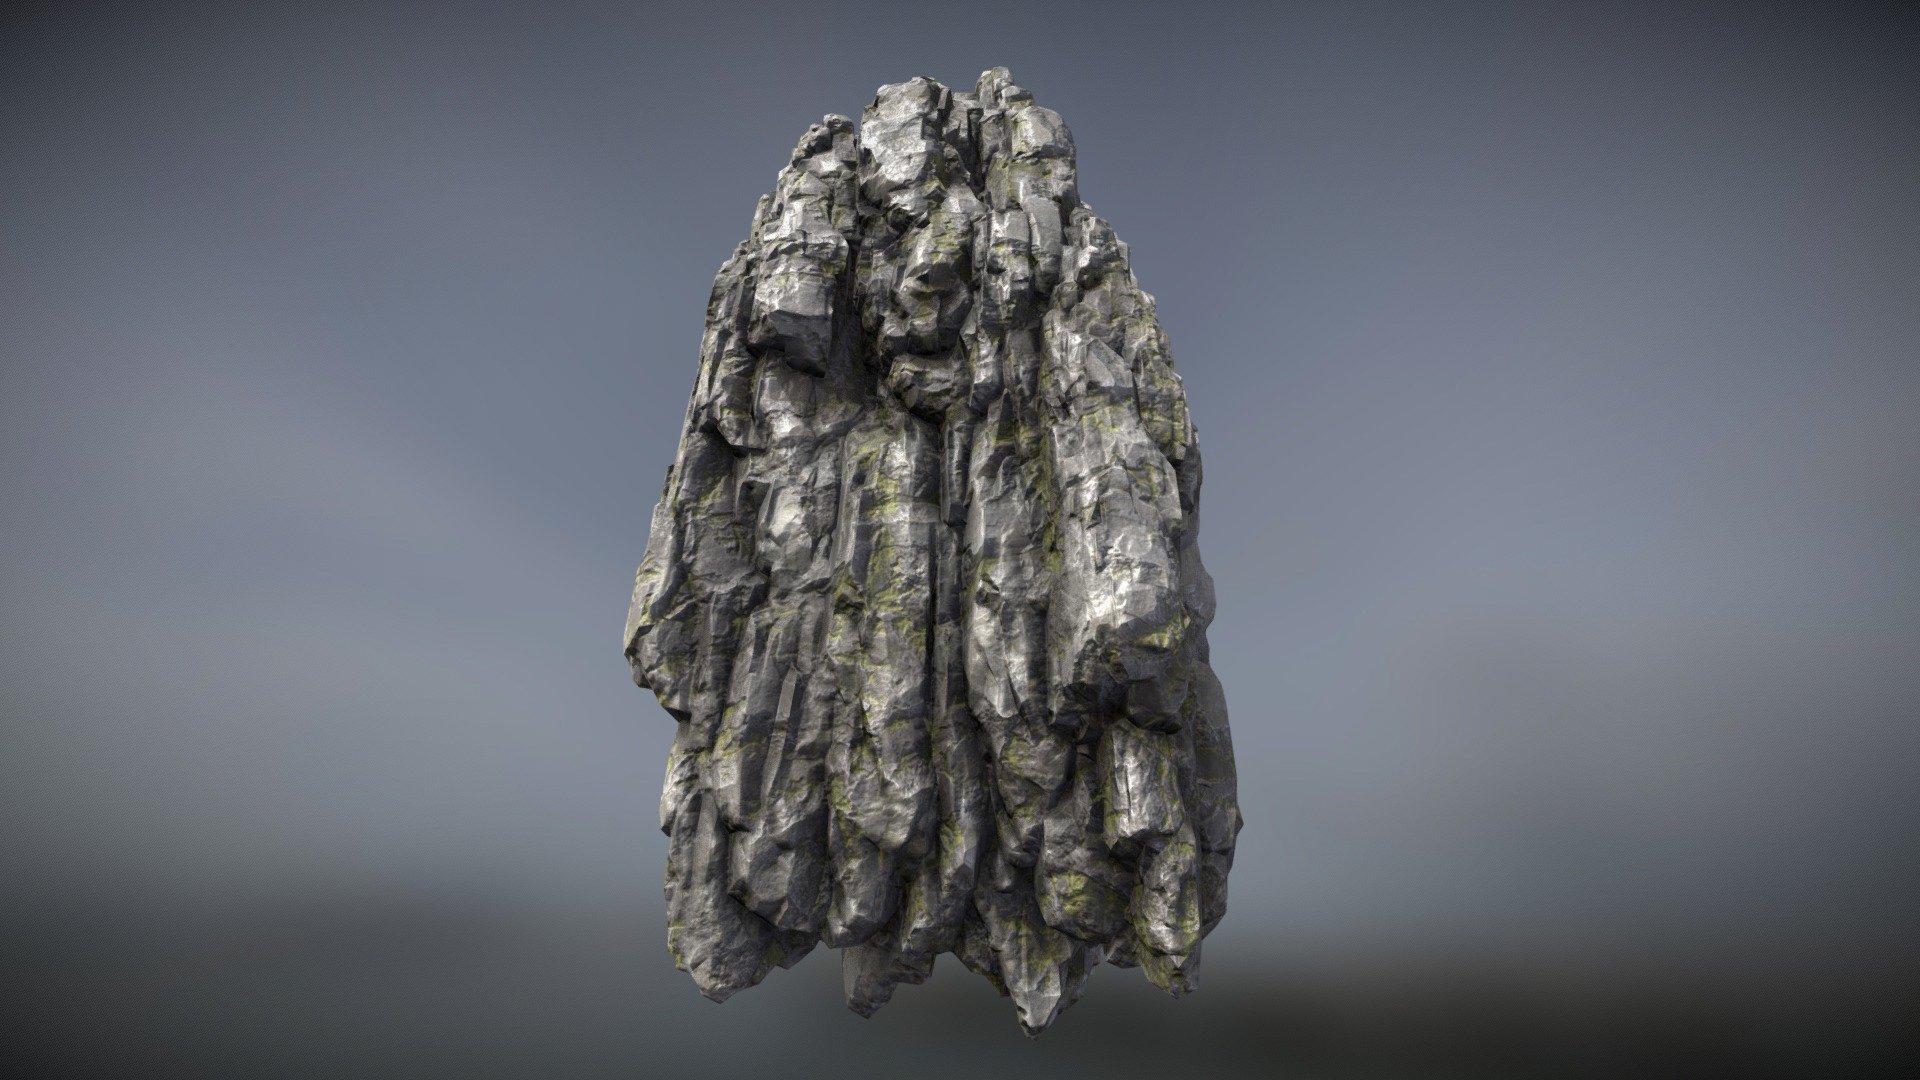 Texture 4k
Diffuse, Normal, Ao, Roughness - Cliff1 180604 - 3D model by cgmodels (@rockCGVN) 3d model